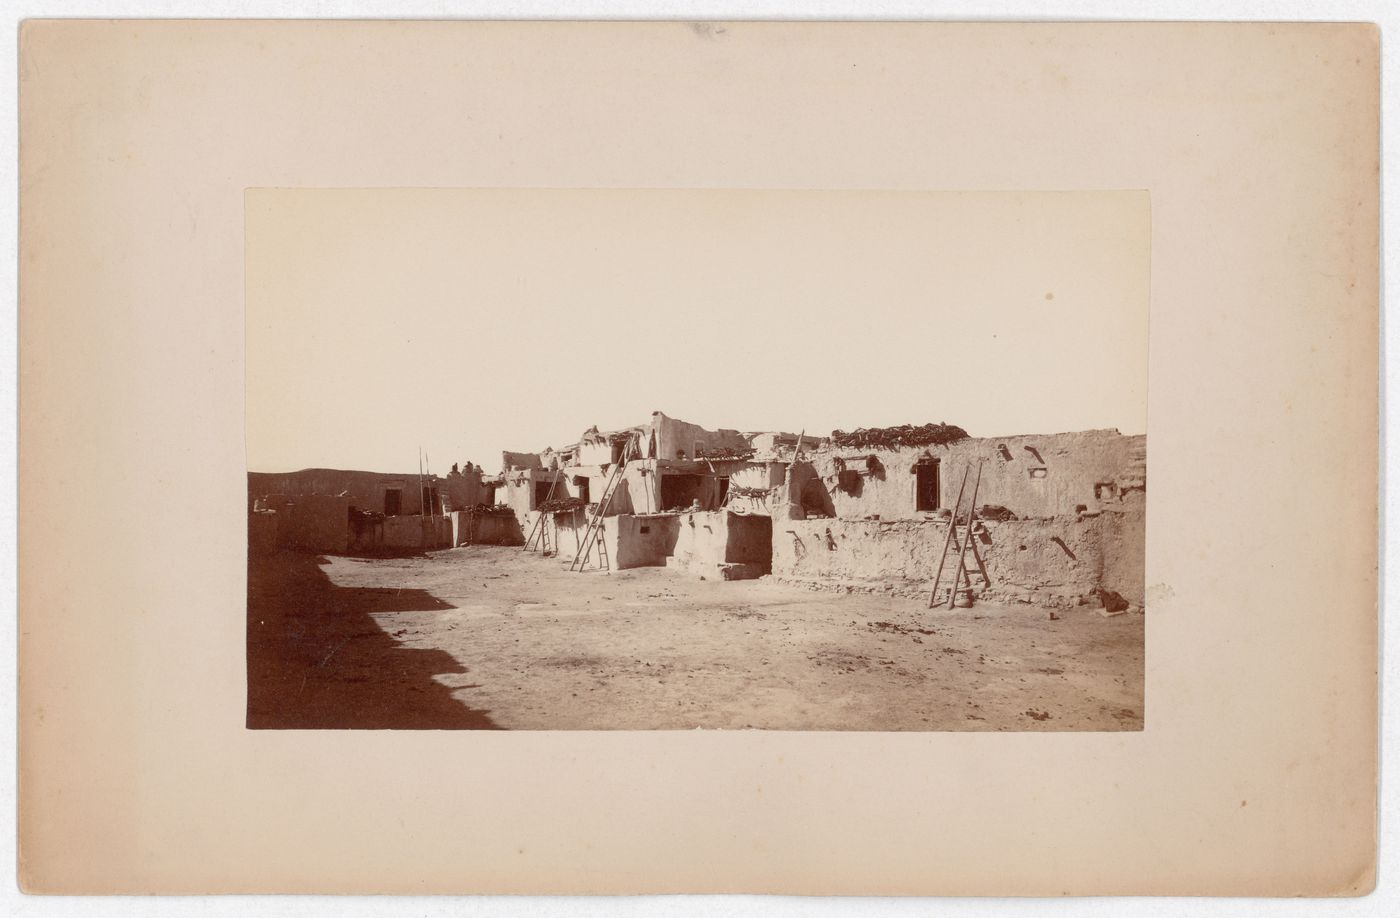 View of multi-storied terraced houses from a courtyard showing ladders and entrances, possibly Arizona, United States